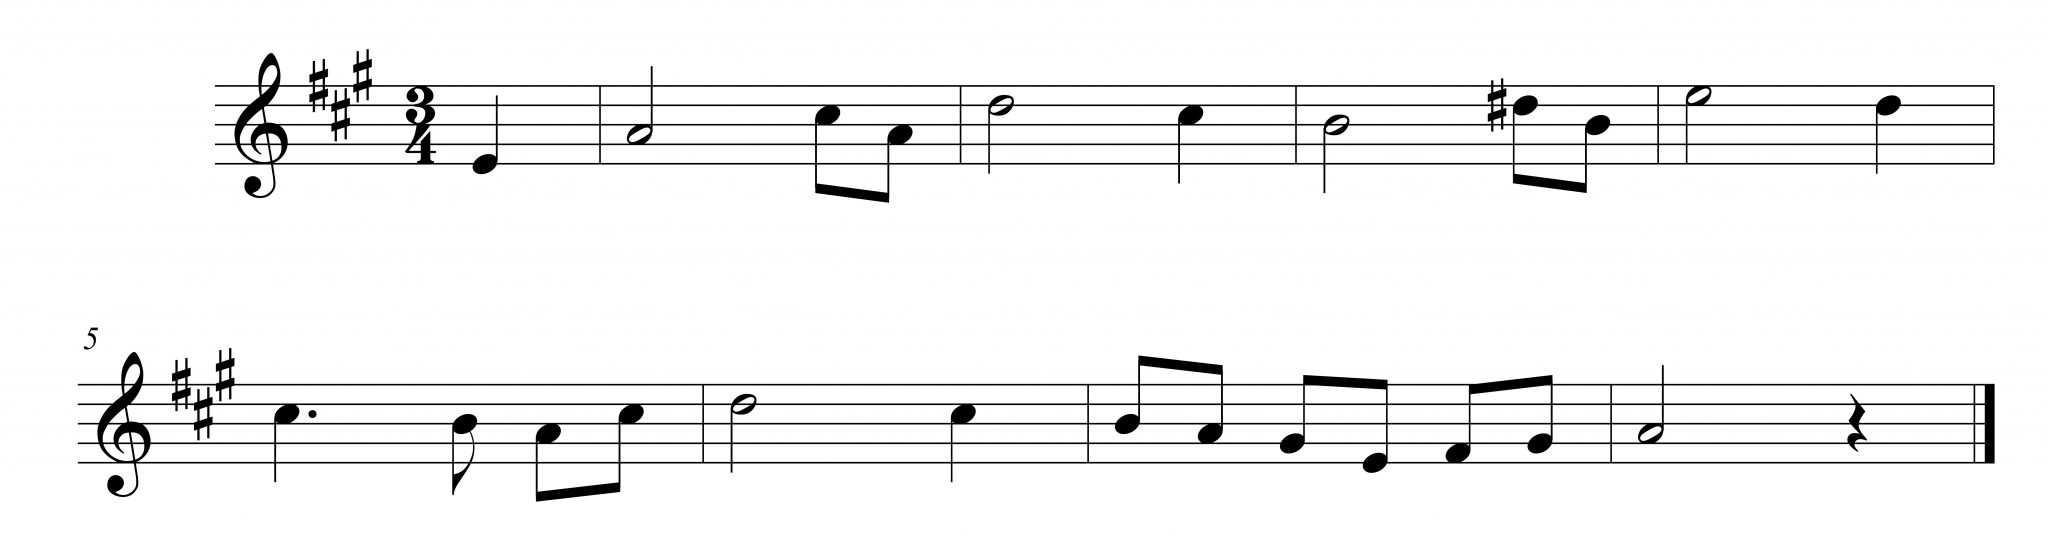 aural training melodic dictation